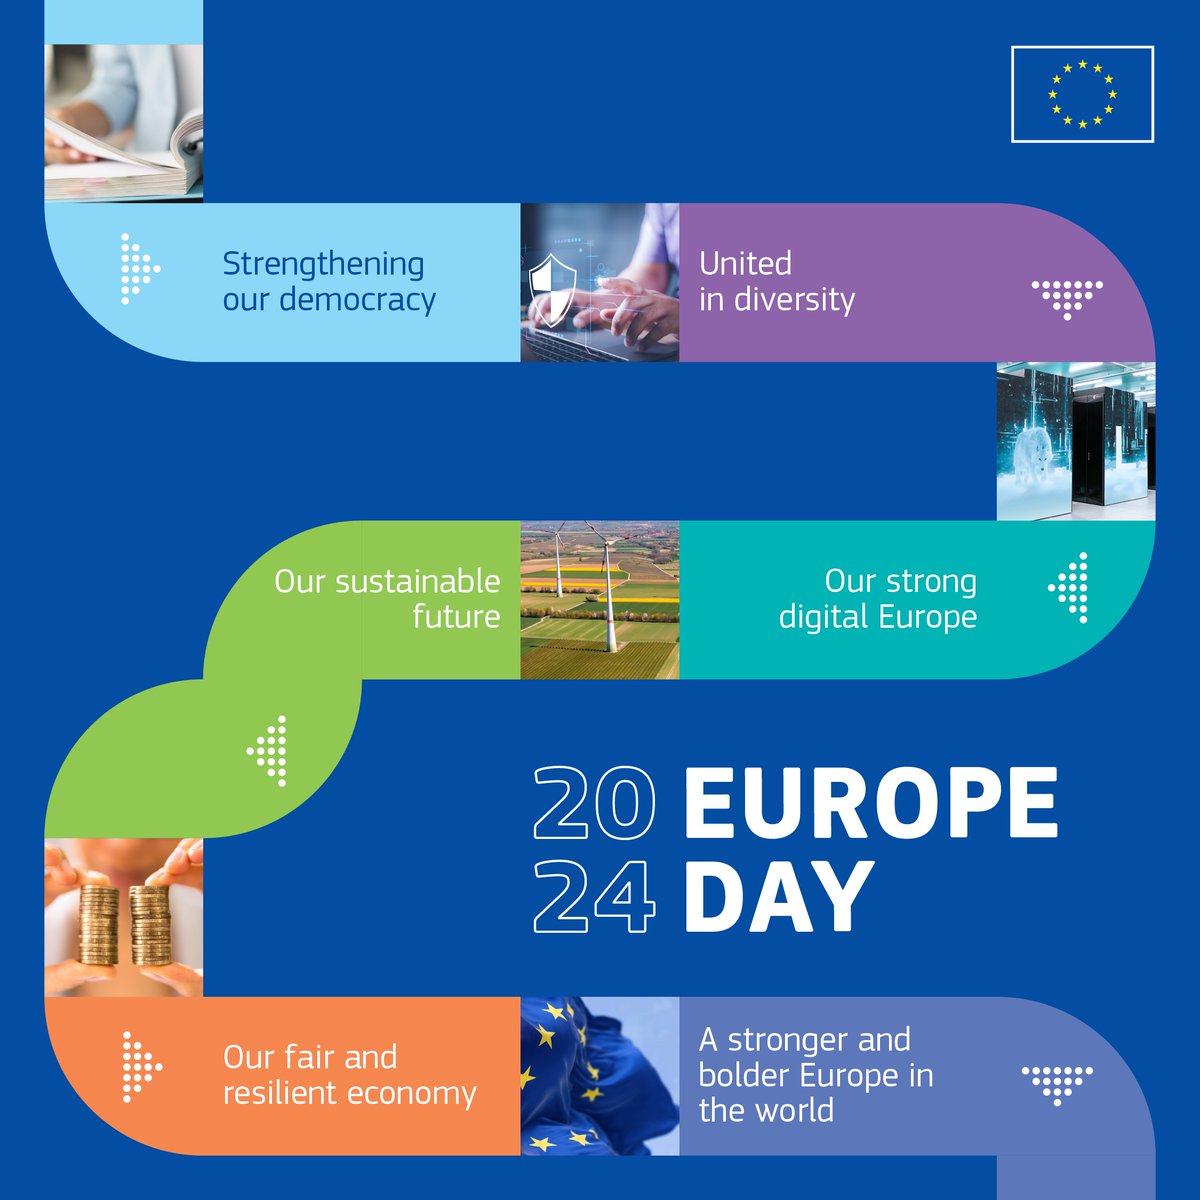 👏🇪🇺#EuropeDay is coming up and to mark the occasion, join us at the EU Open Day on Sat 4/5❗️ Find us @EU_Commission HQ in #BXL in the #SustainableFuture' village More 🔗cinea.ec.europa.eu/news-events/ev… #EU #HorizonEU #Transport #Energy #Climate #EMFAF #LIFE #CEF #InnovationFund